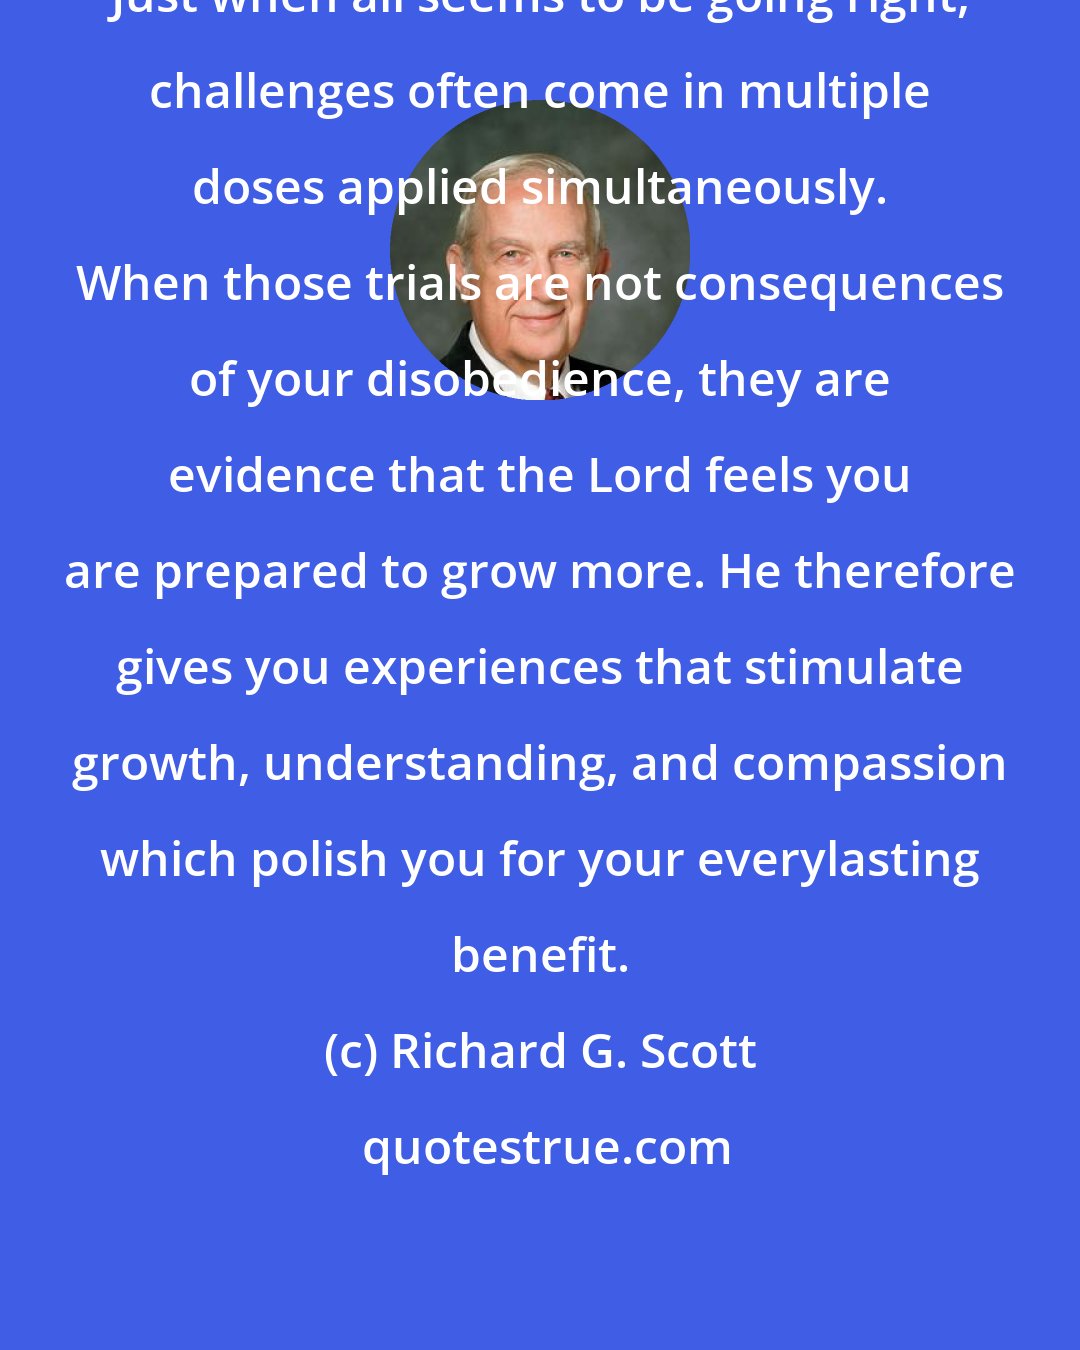 Richard G. Scott: Just when all seems to be going right, challenges often come in multiple doses applied simultaneously. When those trials are not consequences of your disobedience, they are evidence that the Lord feels you are prepared to grow more. He therefore gives you experiences that stimulate growth, understanding, and compassion which polish you for your everylasting benefit.